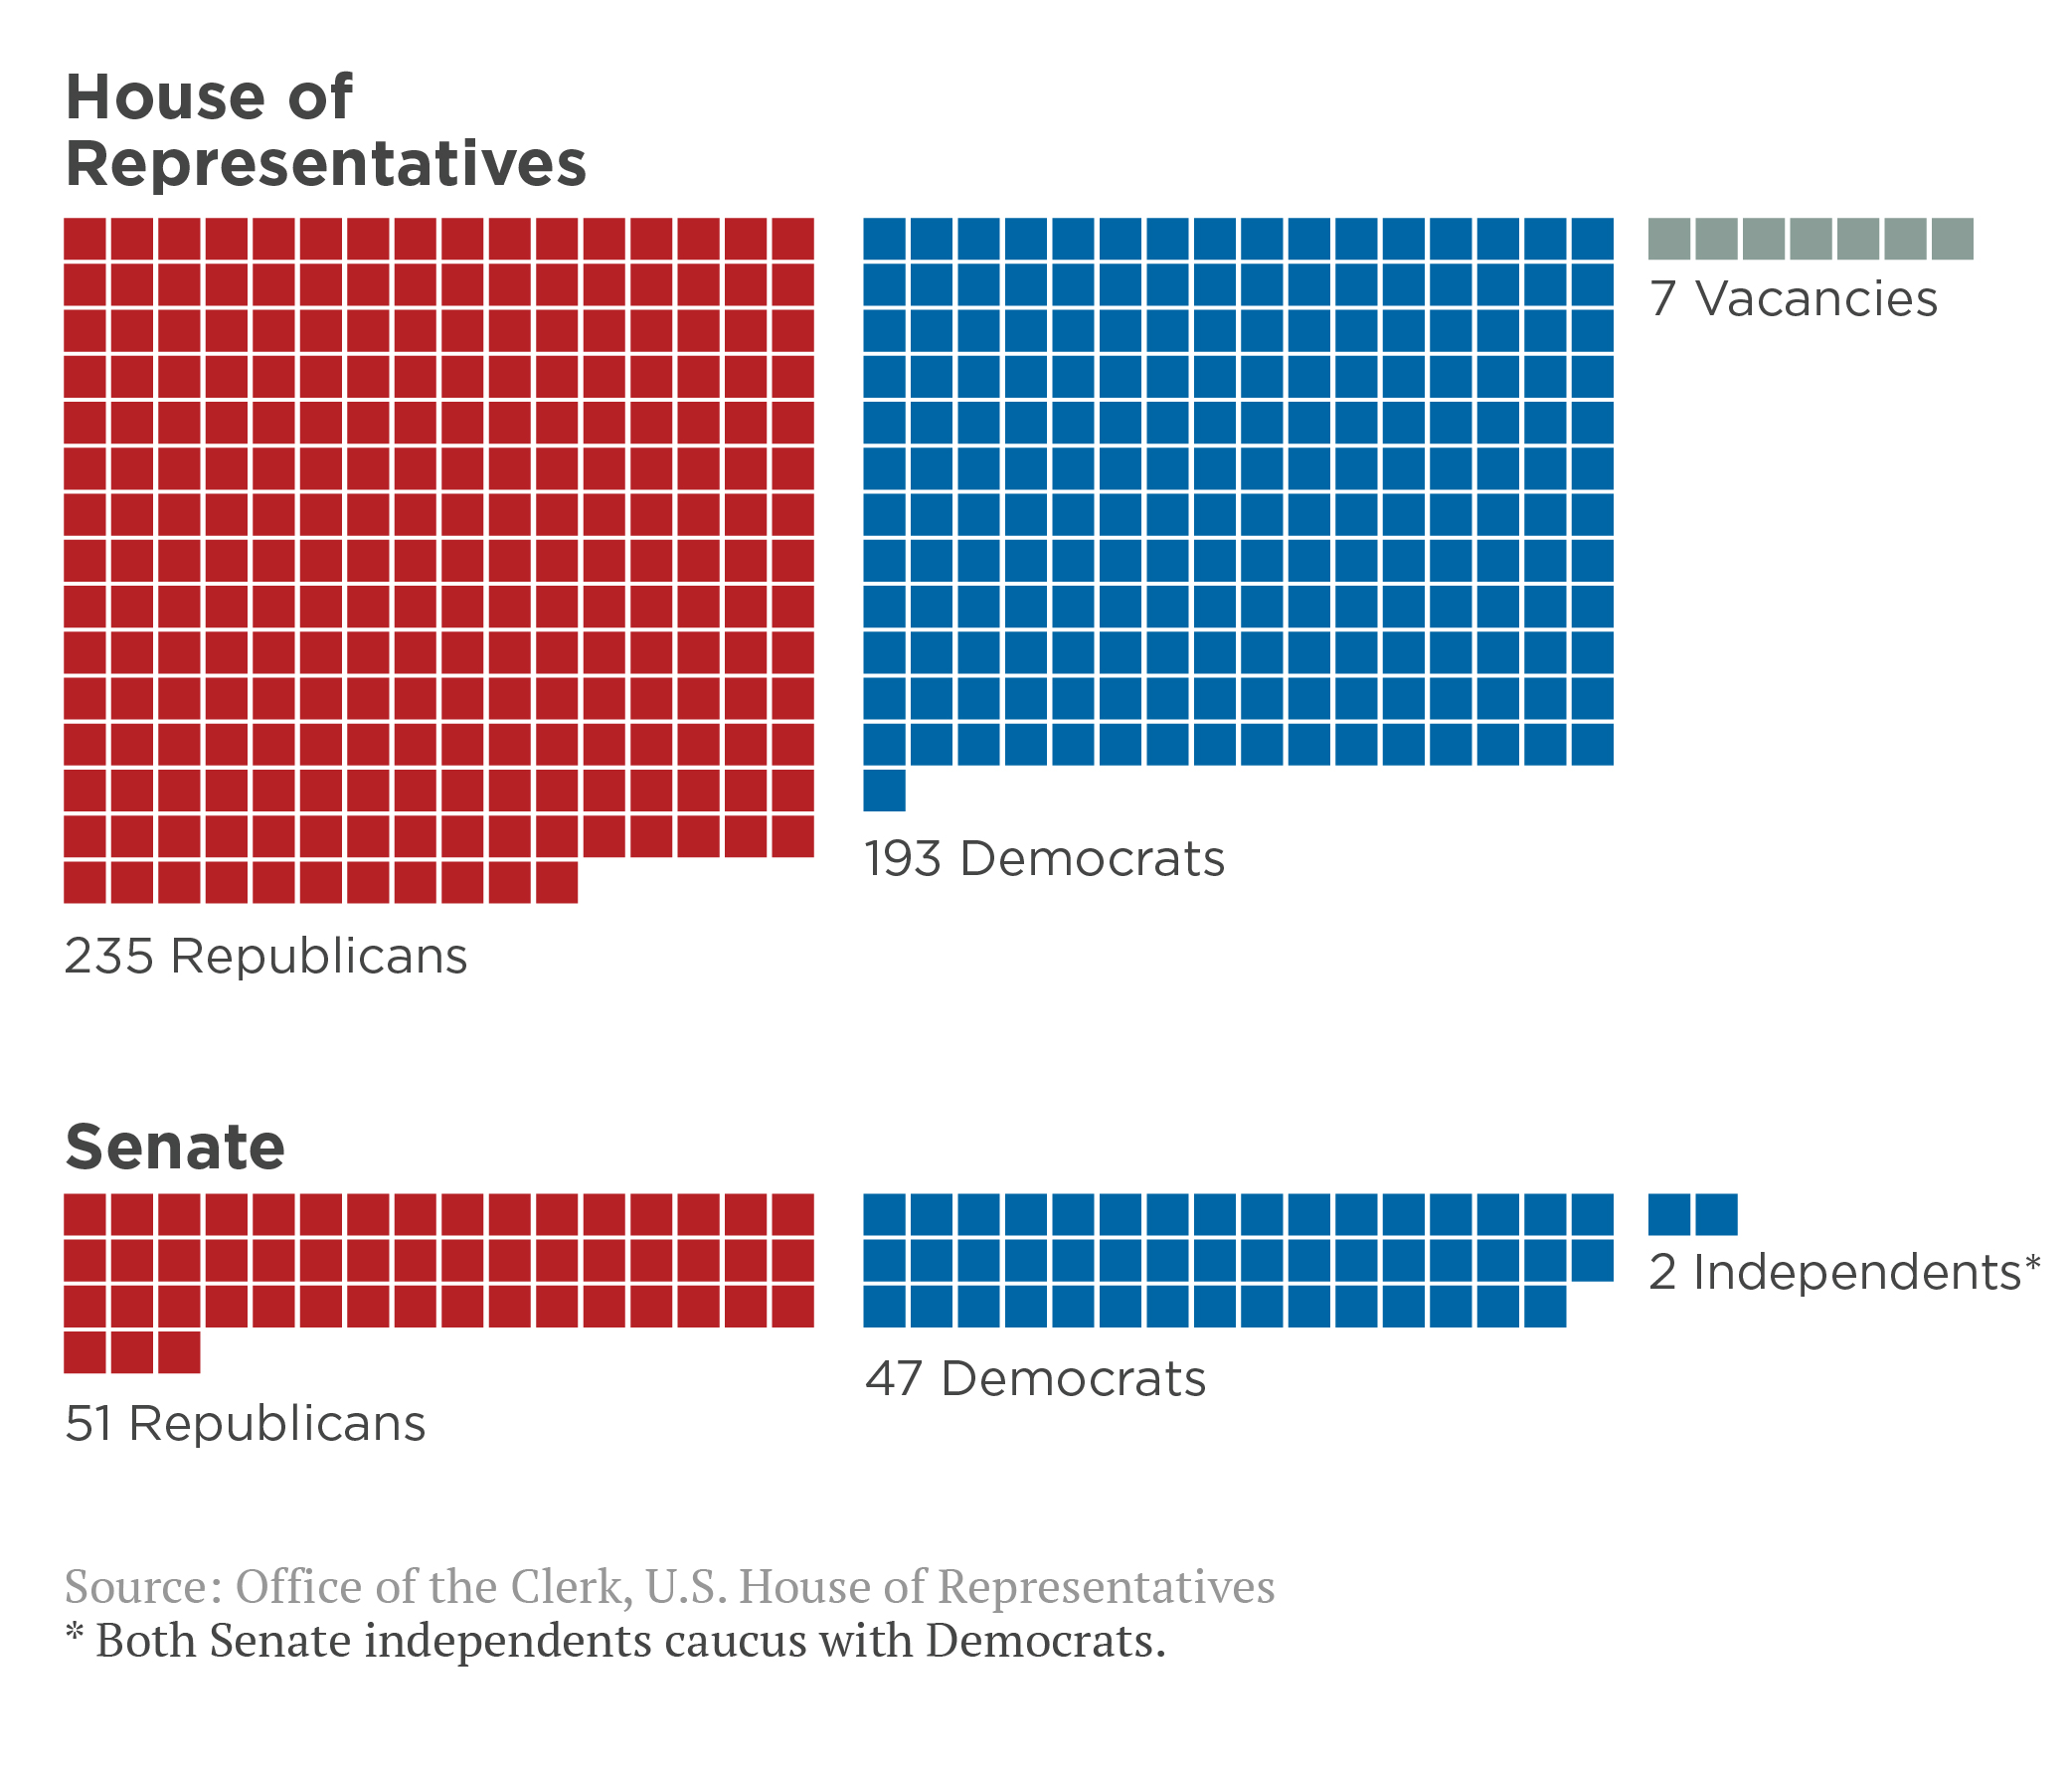 <h3>Balance of Power in the 115th Congress</h3>